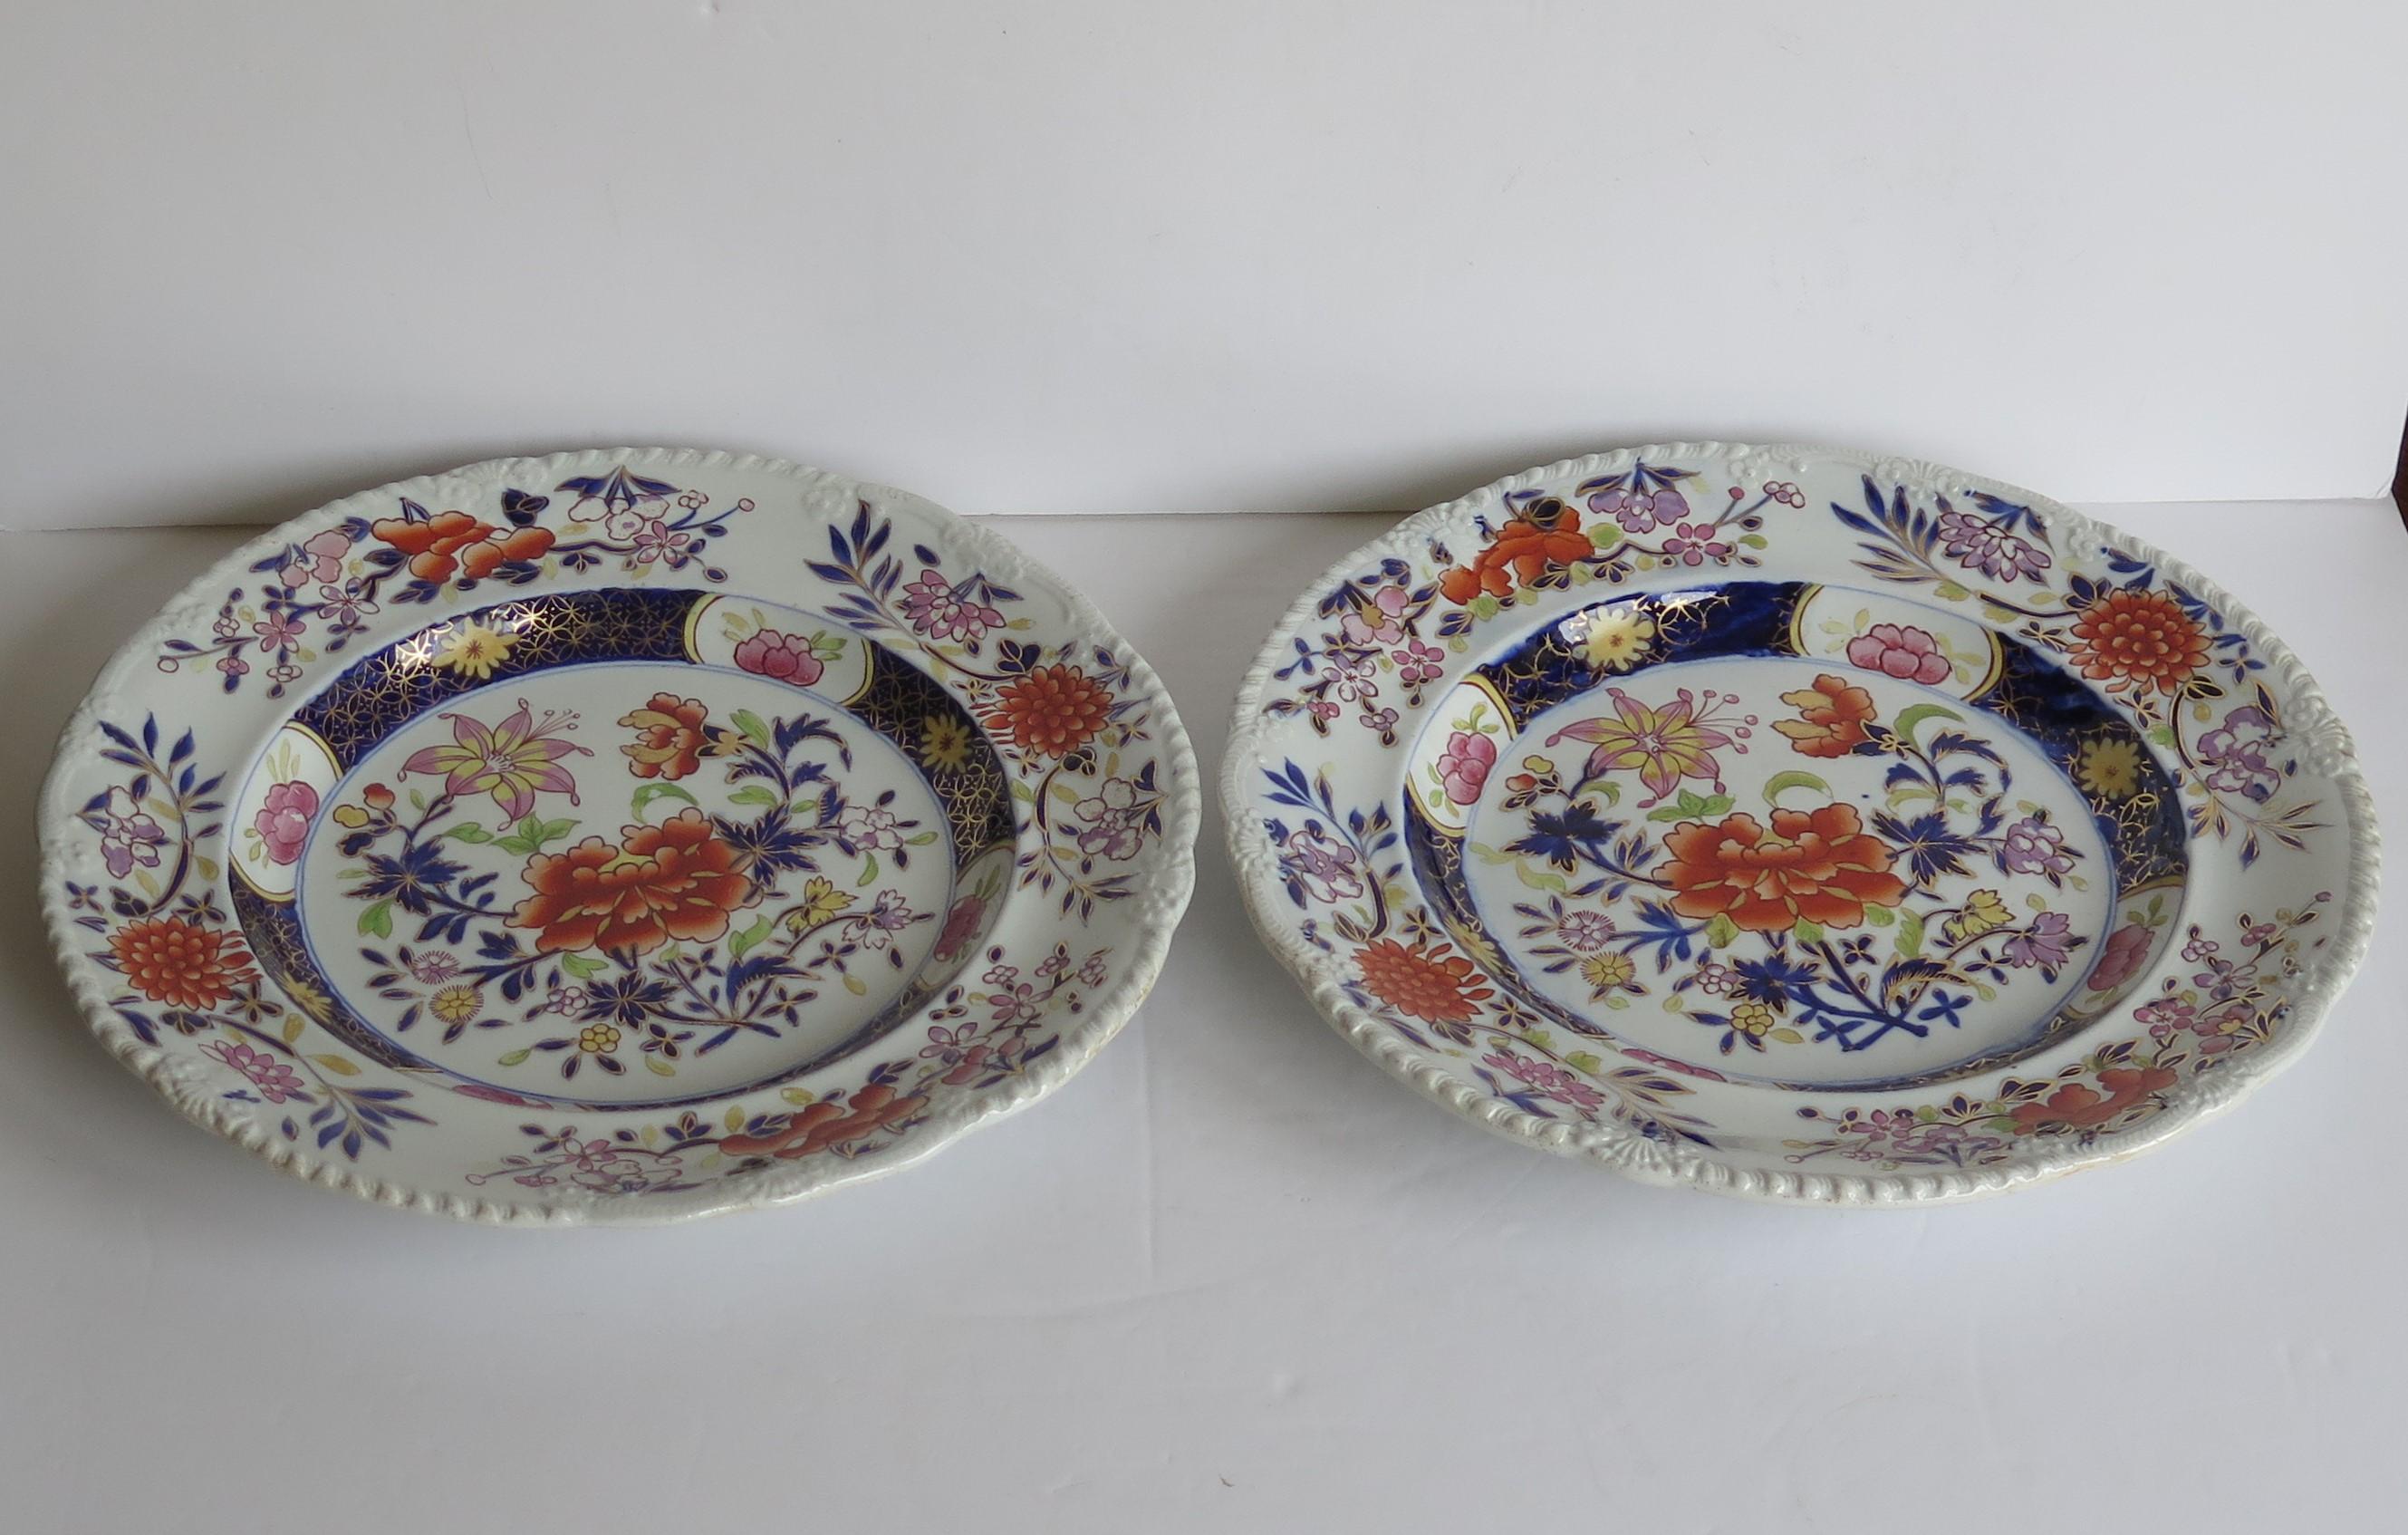 This fine pair of Ironstone pottery large dinner plates were made by the Mason's factory at Lane Delph, Staffordshire, England and are decorated in the Heavily Floral Japan pattern, fully stamped and dating to the earliest period of Mason's